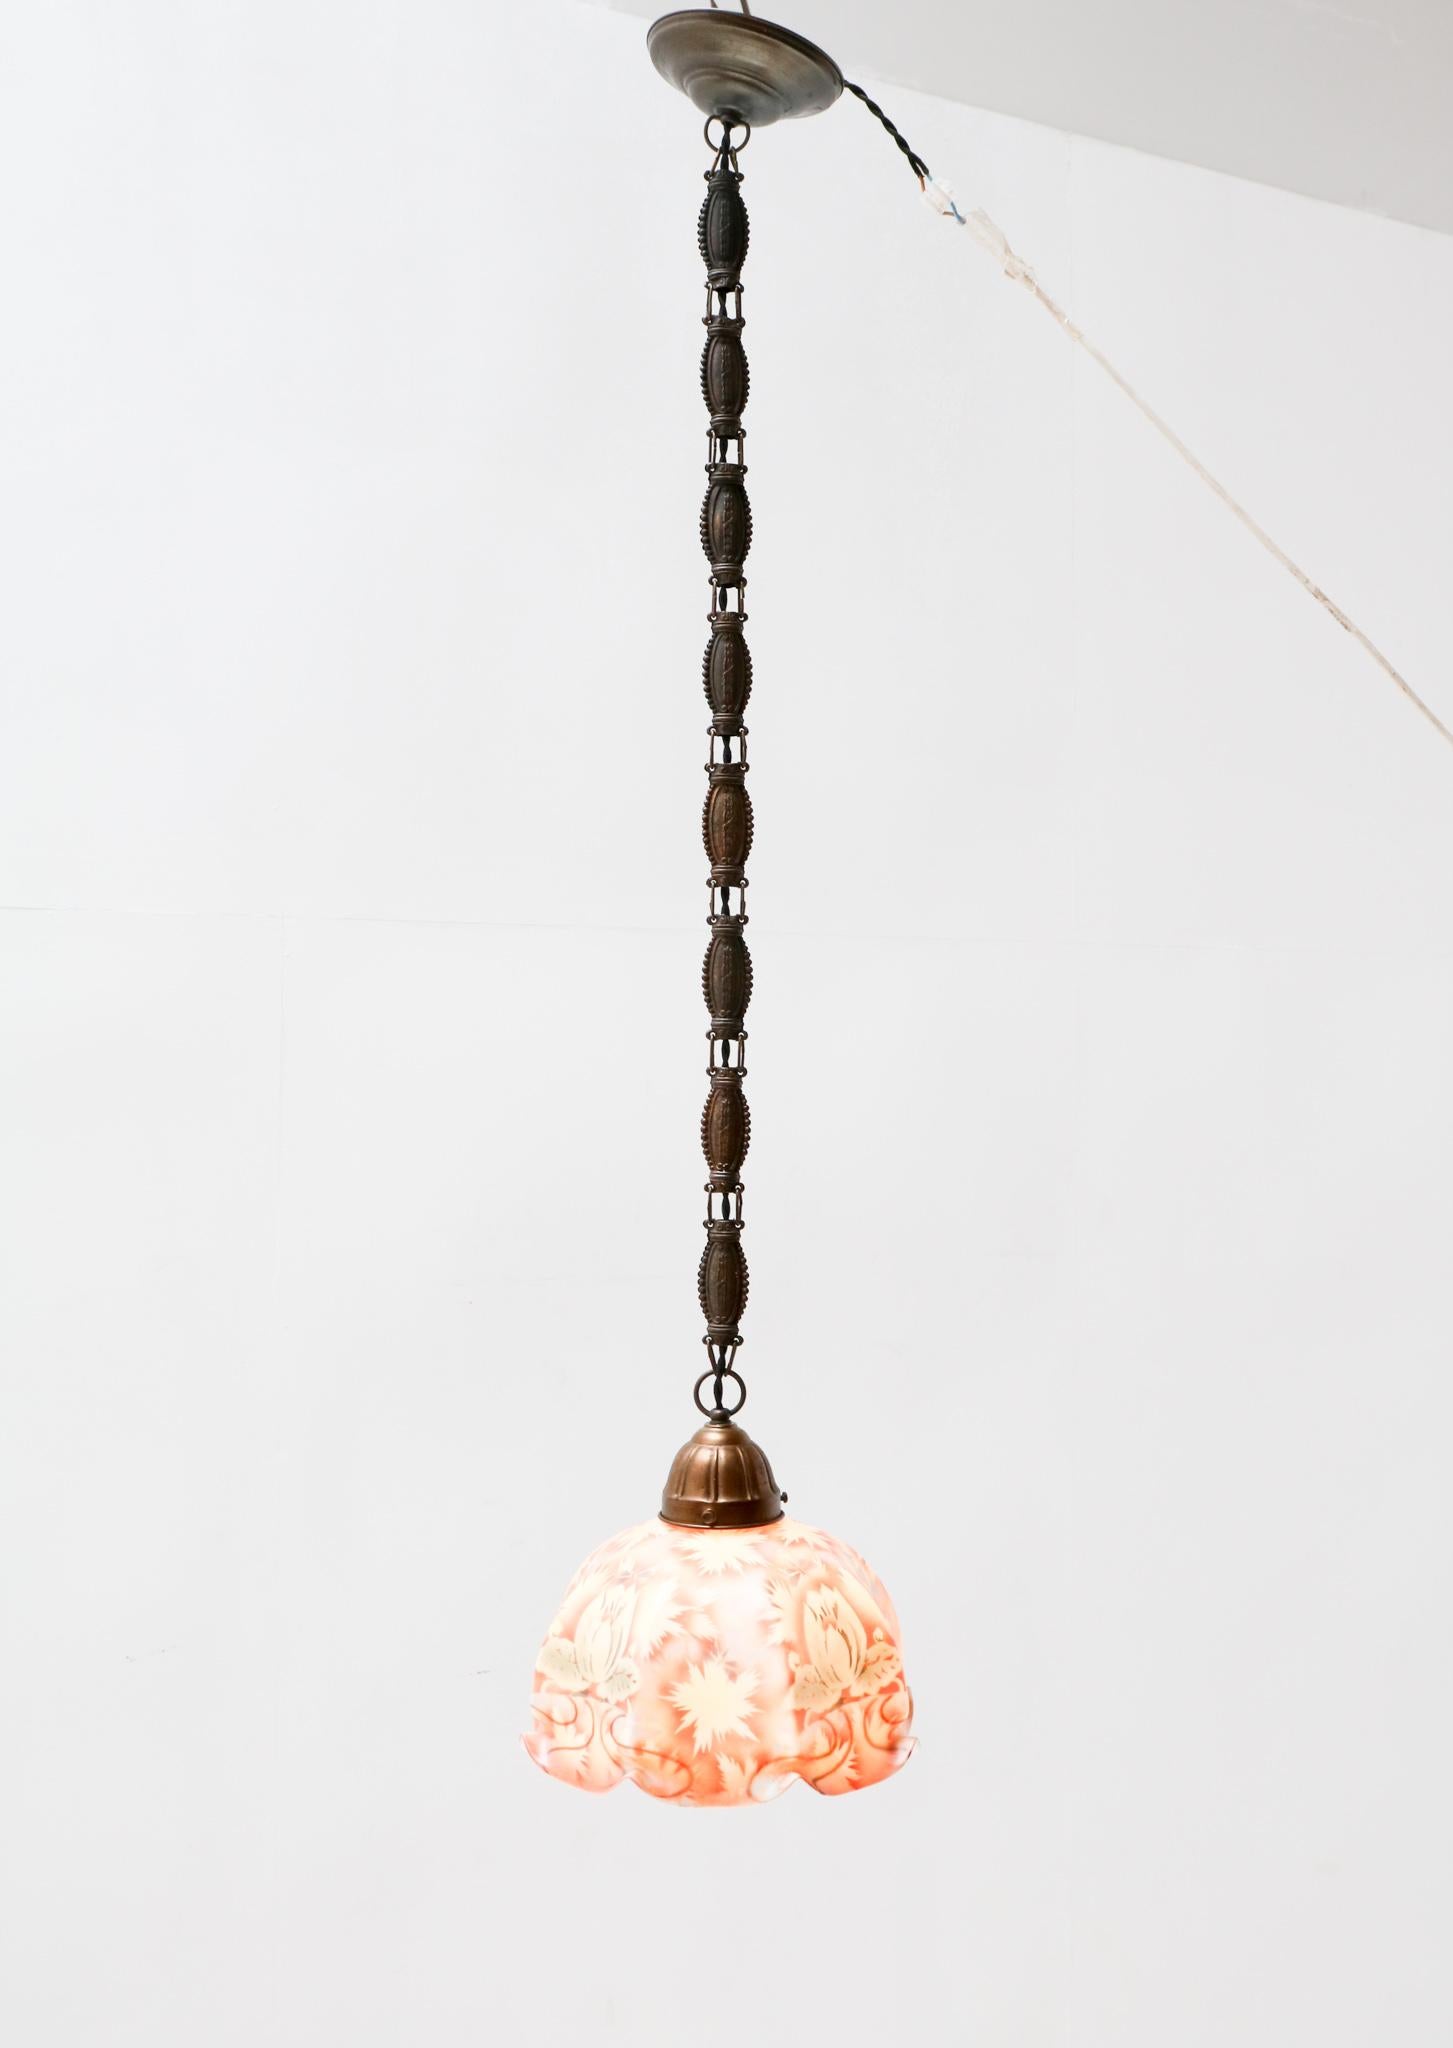 Stunning and elegant Art Nouveau pendant light.
Striking Dutch design from the 1900s.
Patinated brass with original multi-colored glass shade.
Rewired with original socket for E-27 light bulb.
This wonderful Art Nouveau pendant light is in very